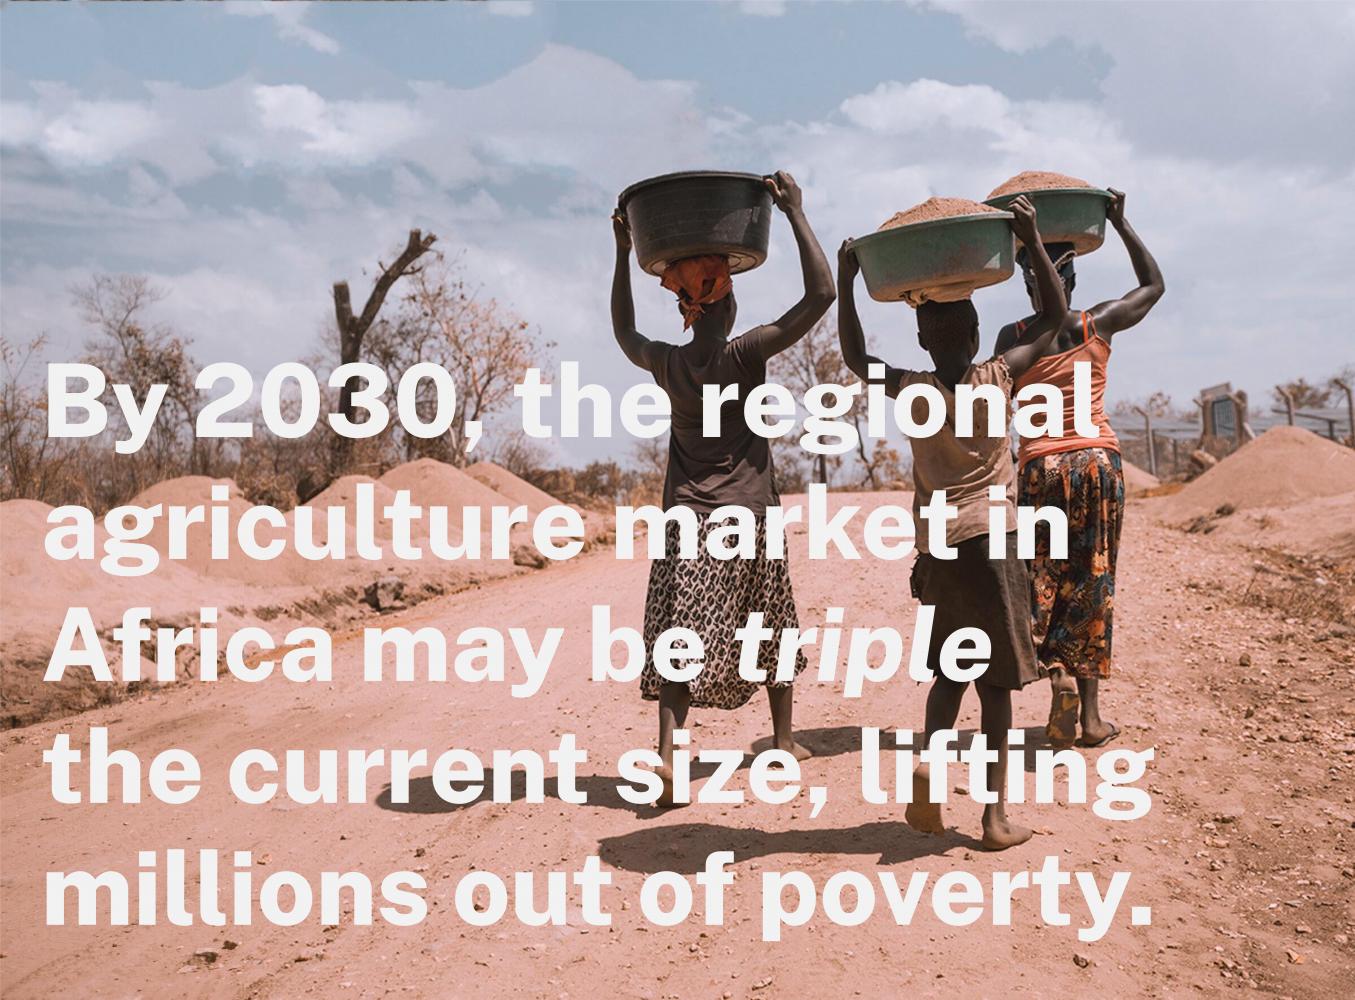 By 2030, the regional agriculture market in Africa may be triple the current size, lifting millions out of poverty.